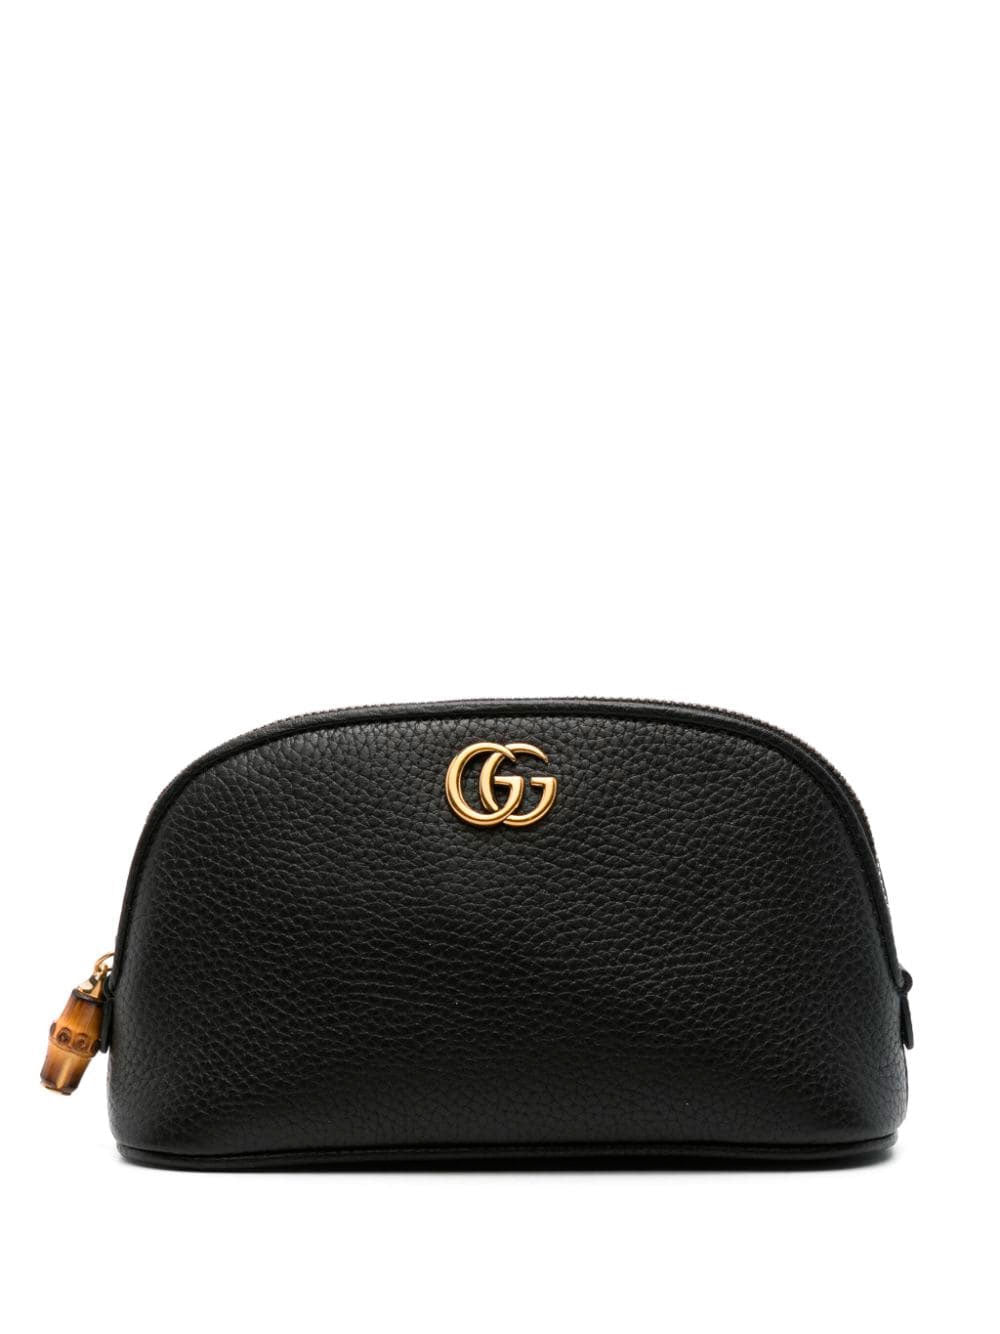 Double G toiletry bag